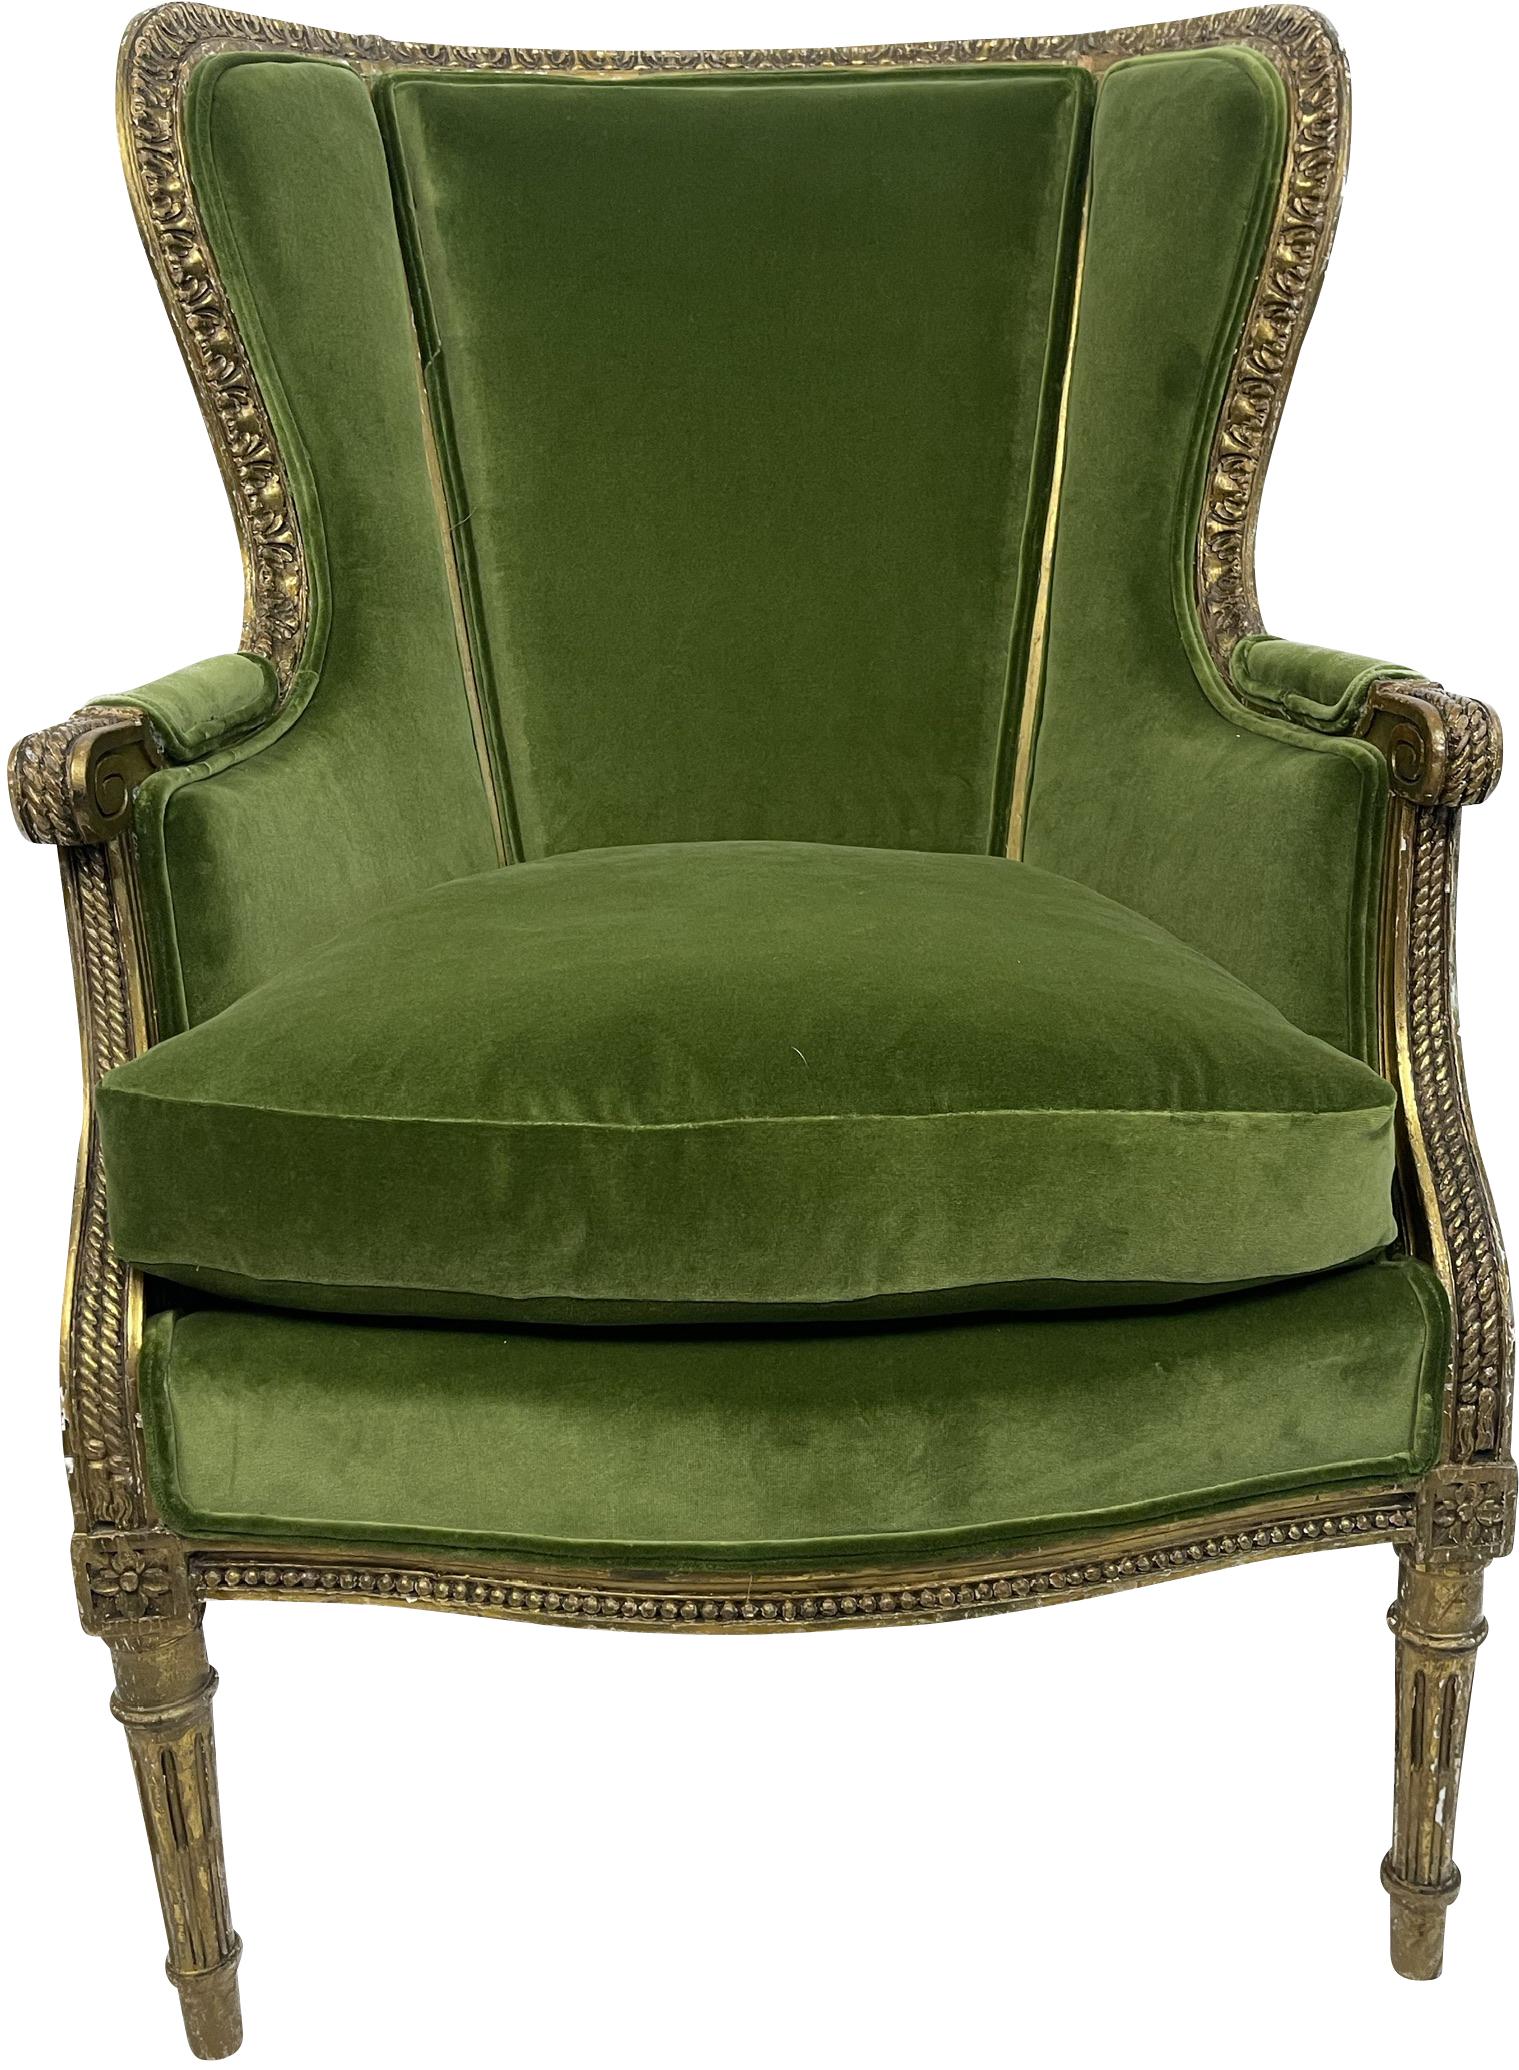 Louis XVI Style Giltwood Carved Bergere/ Arnchair with Green Velvet For Sale 1